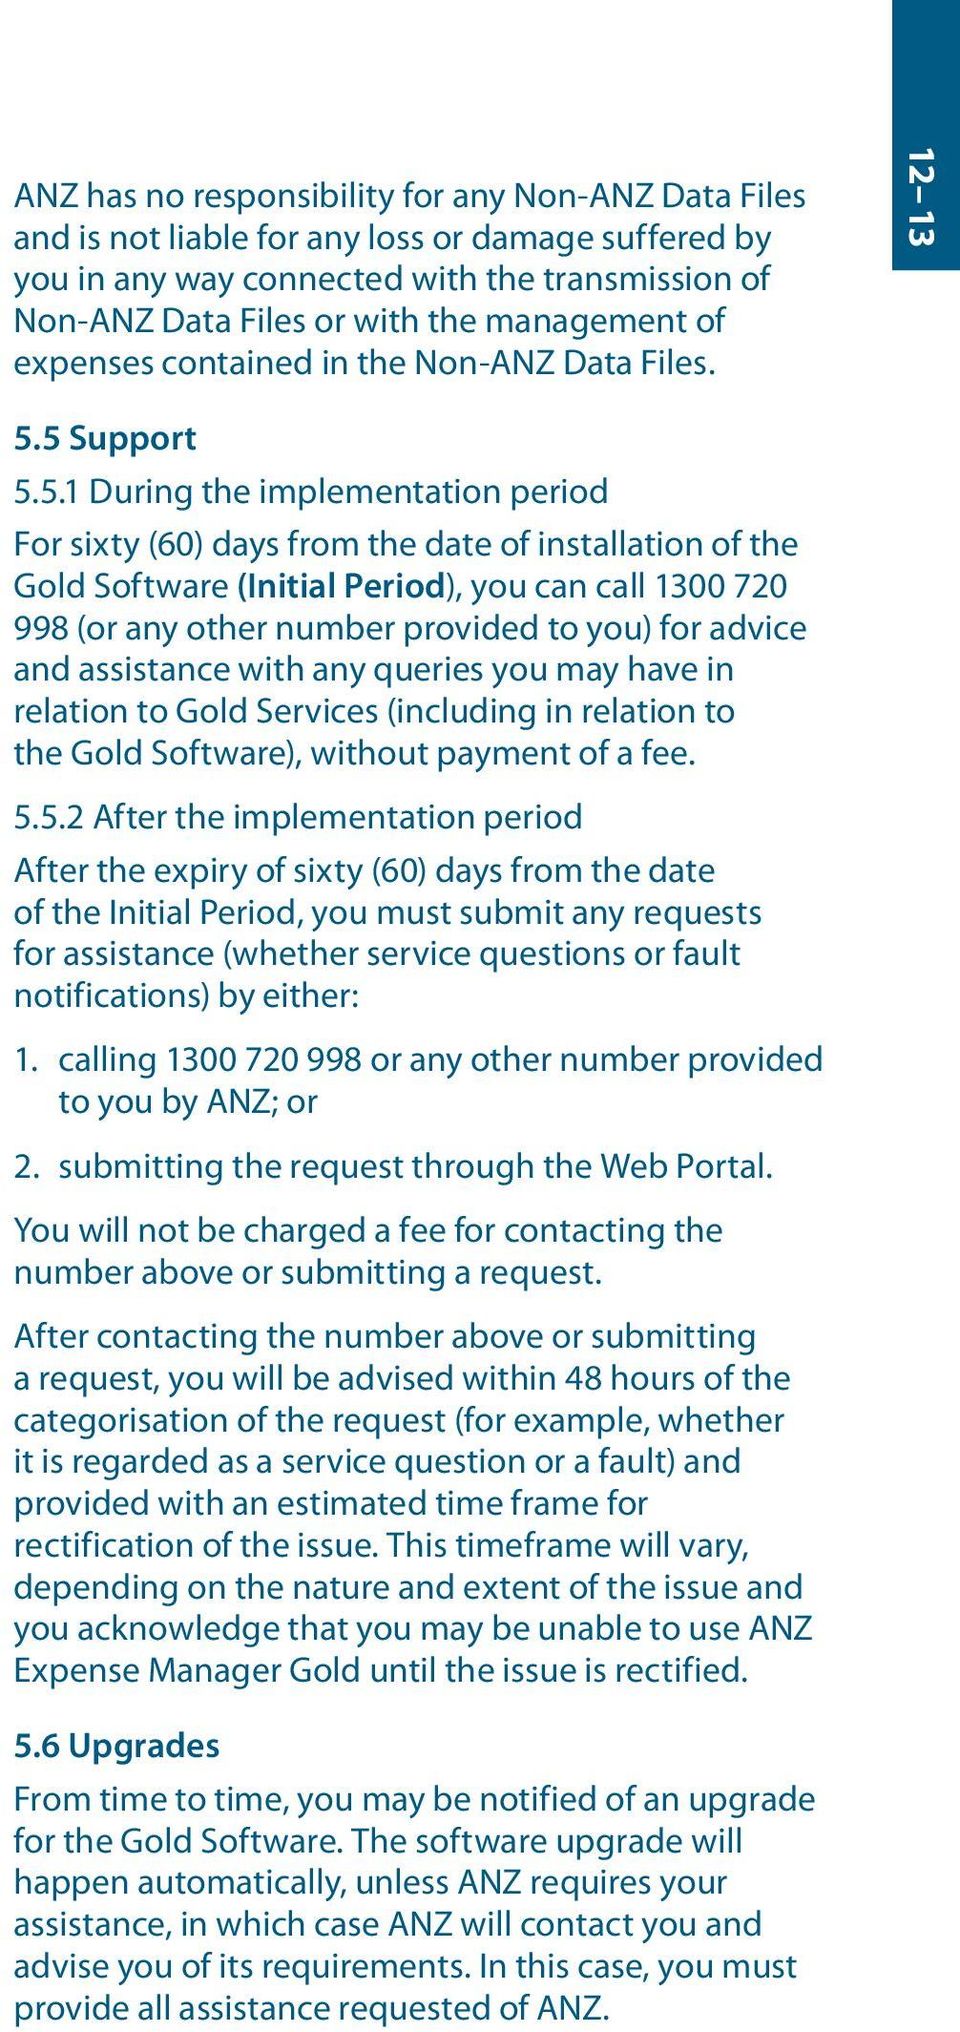 5 Support 5.5.1 During the implementation period For sixty (60) days from the date of installation of the Gold Software (Initial Period), you can call 1300 720 998 (or any other number provided to